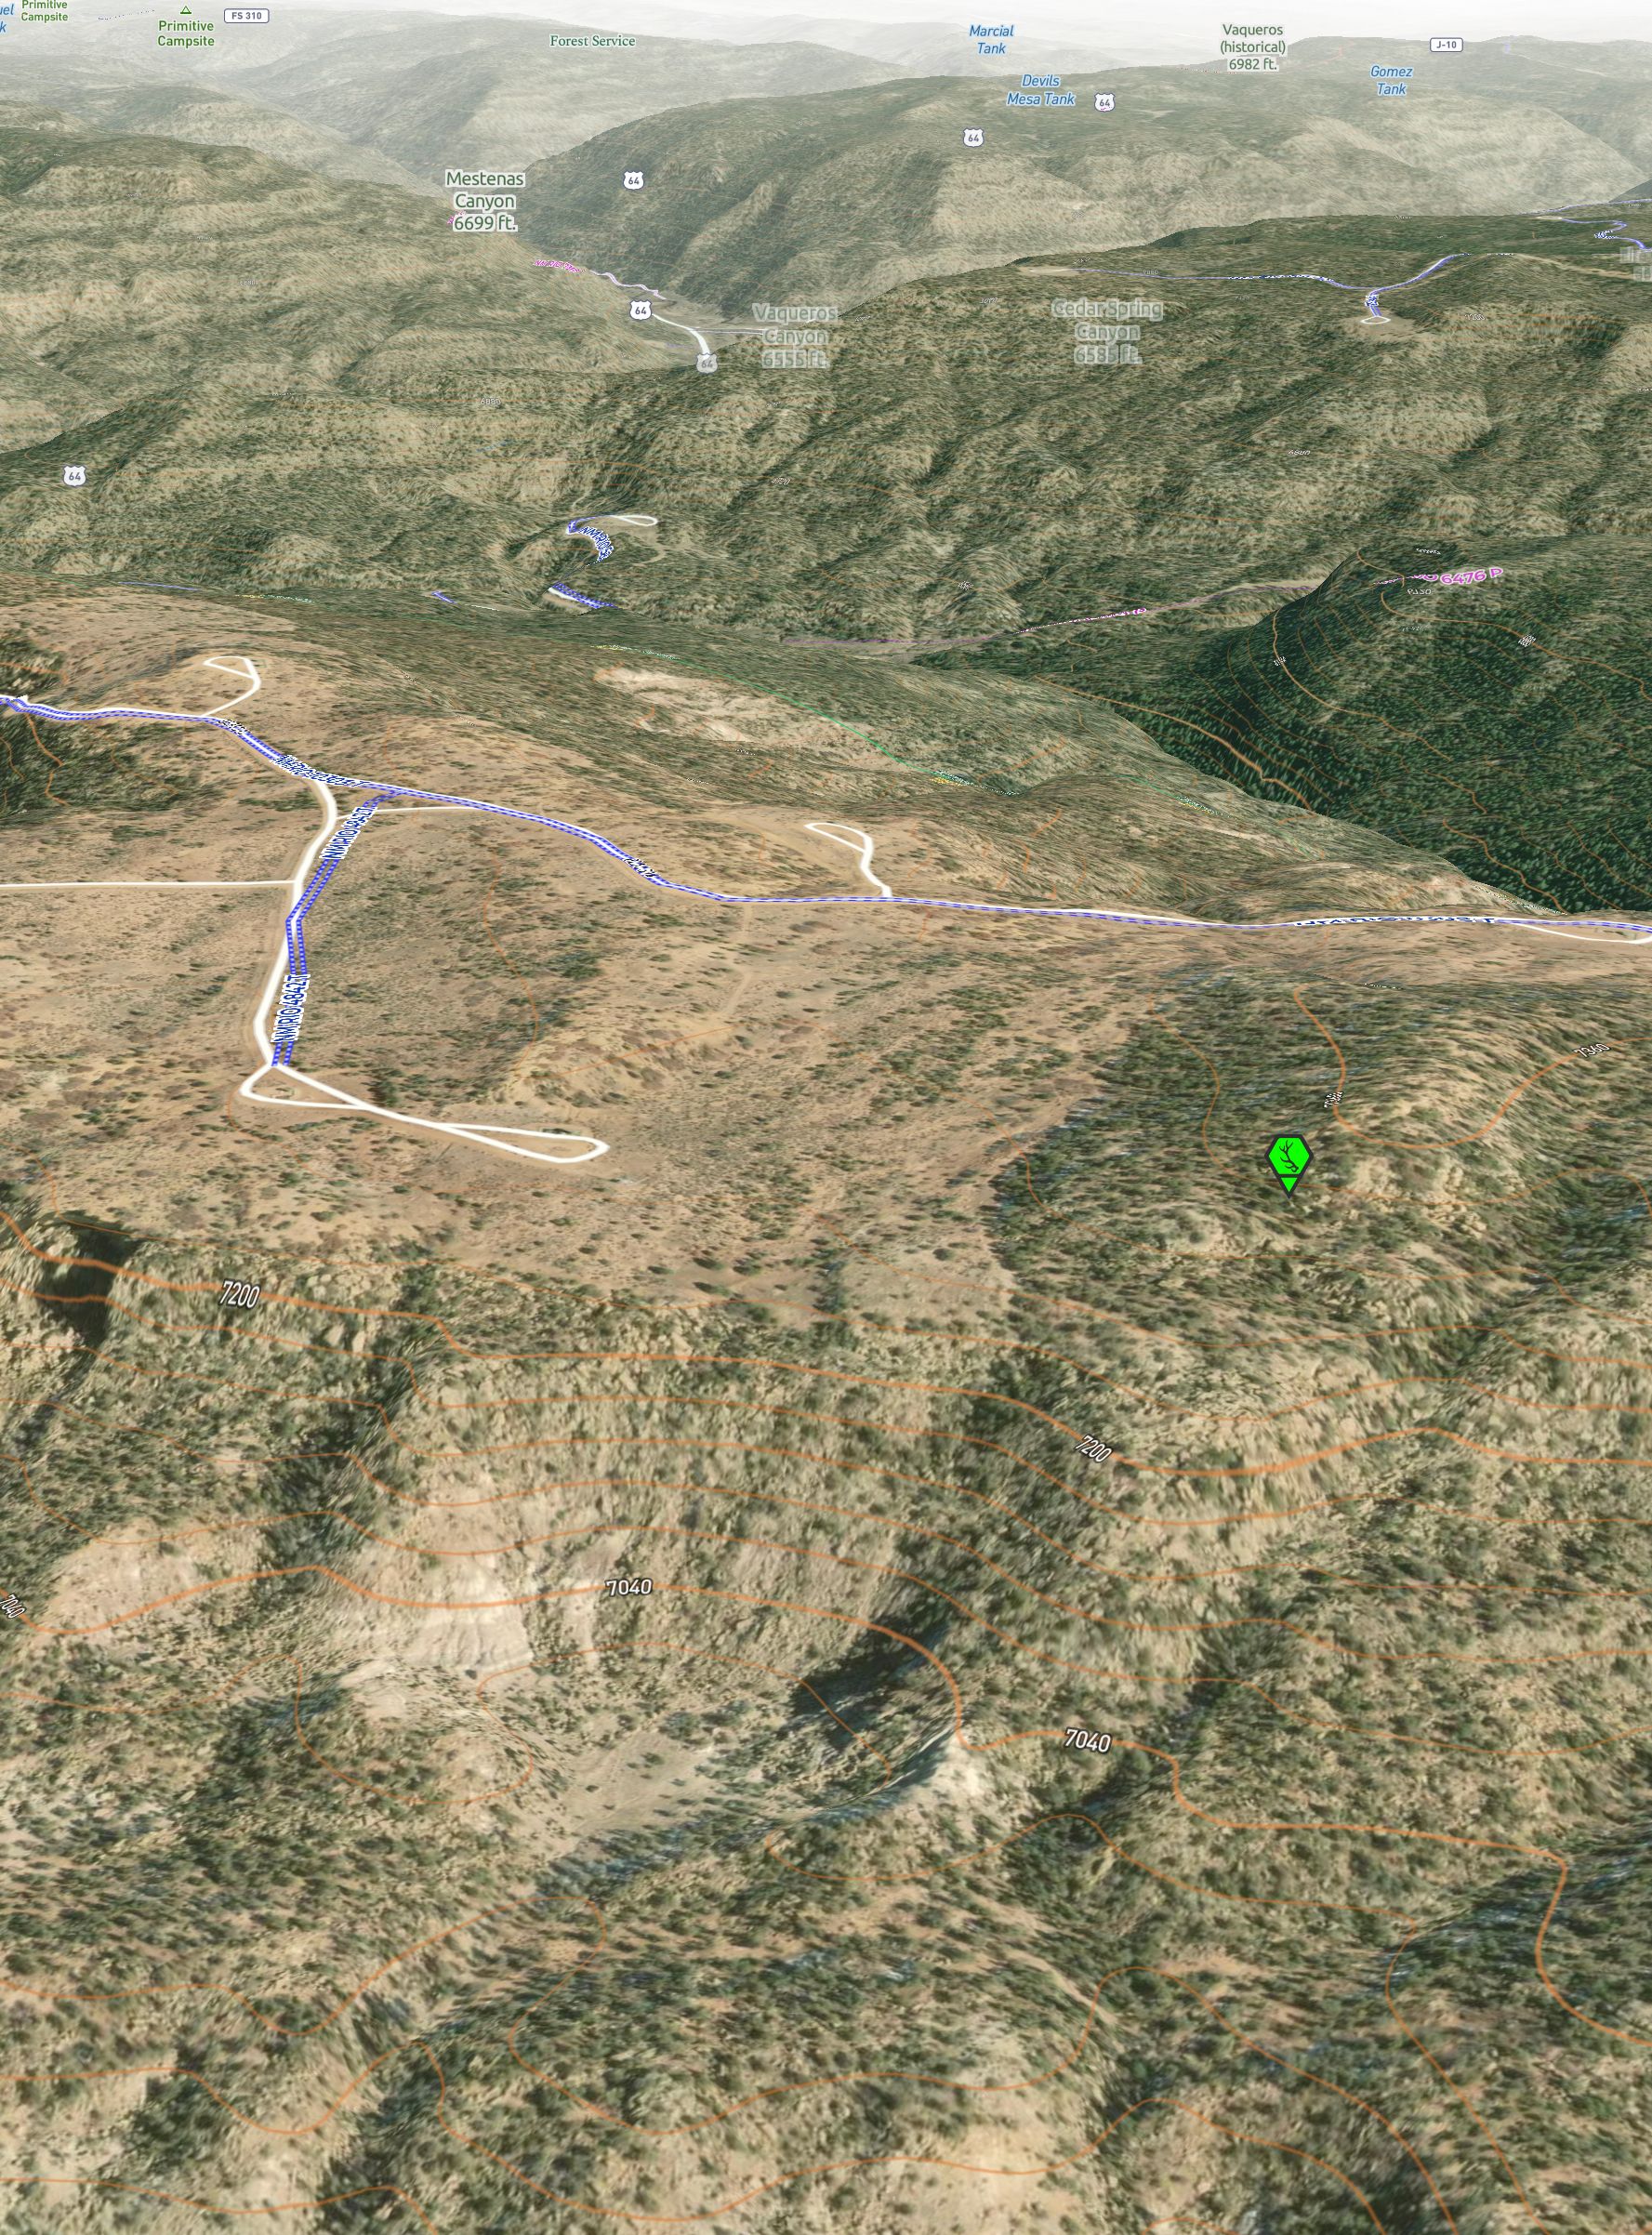 Offline 3D Satellite Map with UnPaved™ Off-roads and Trails map layer - Scout To Hunt App